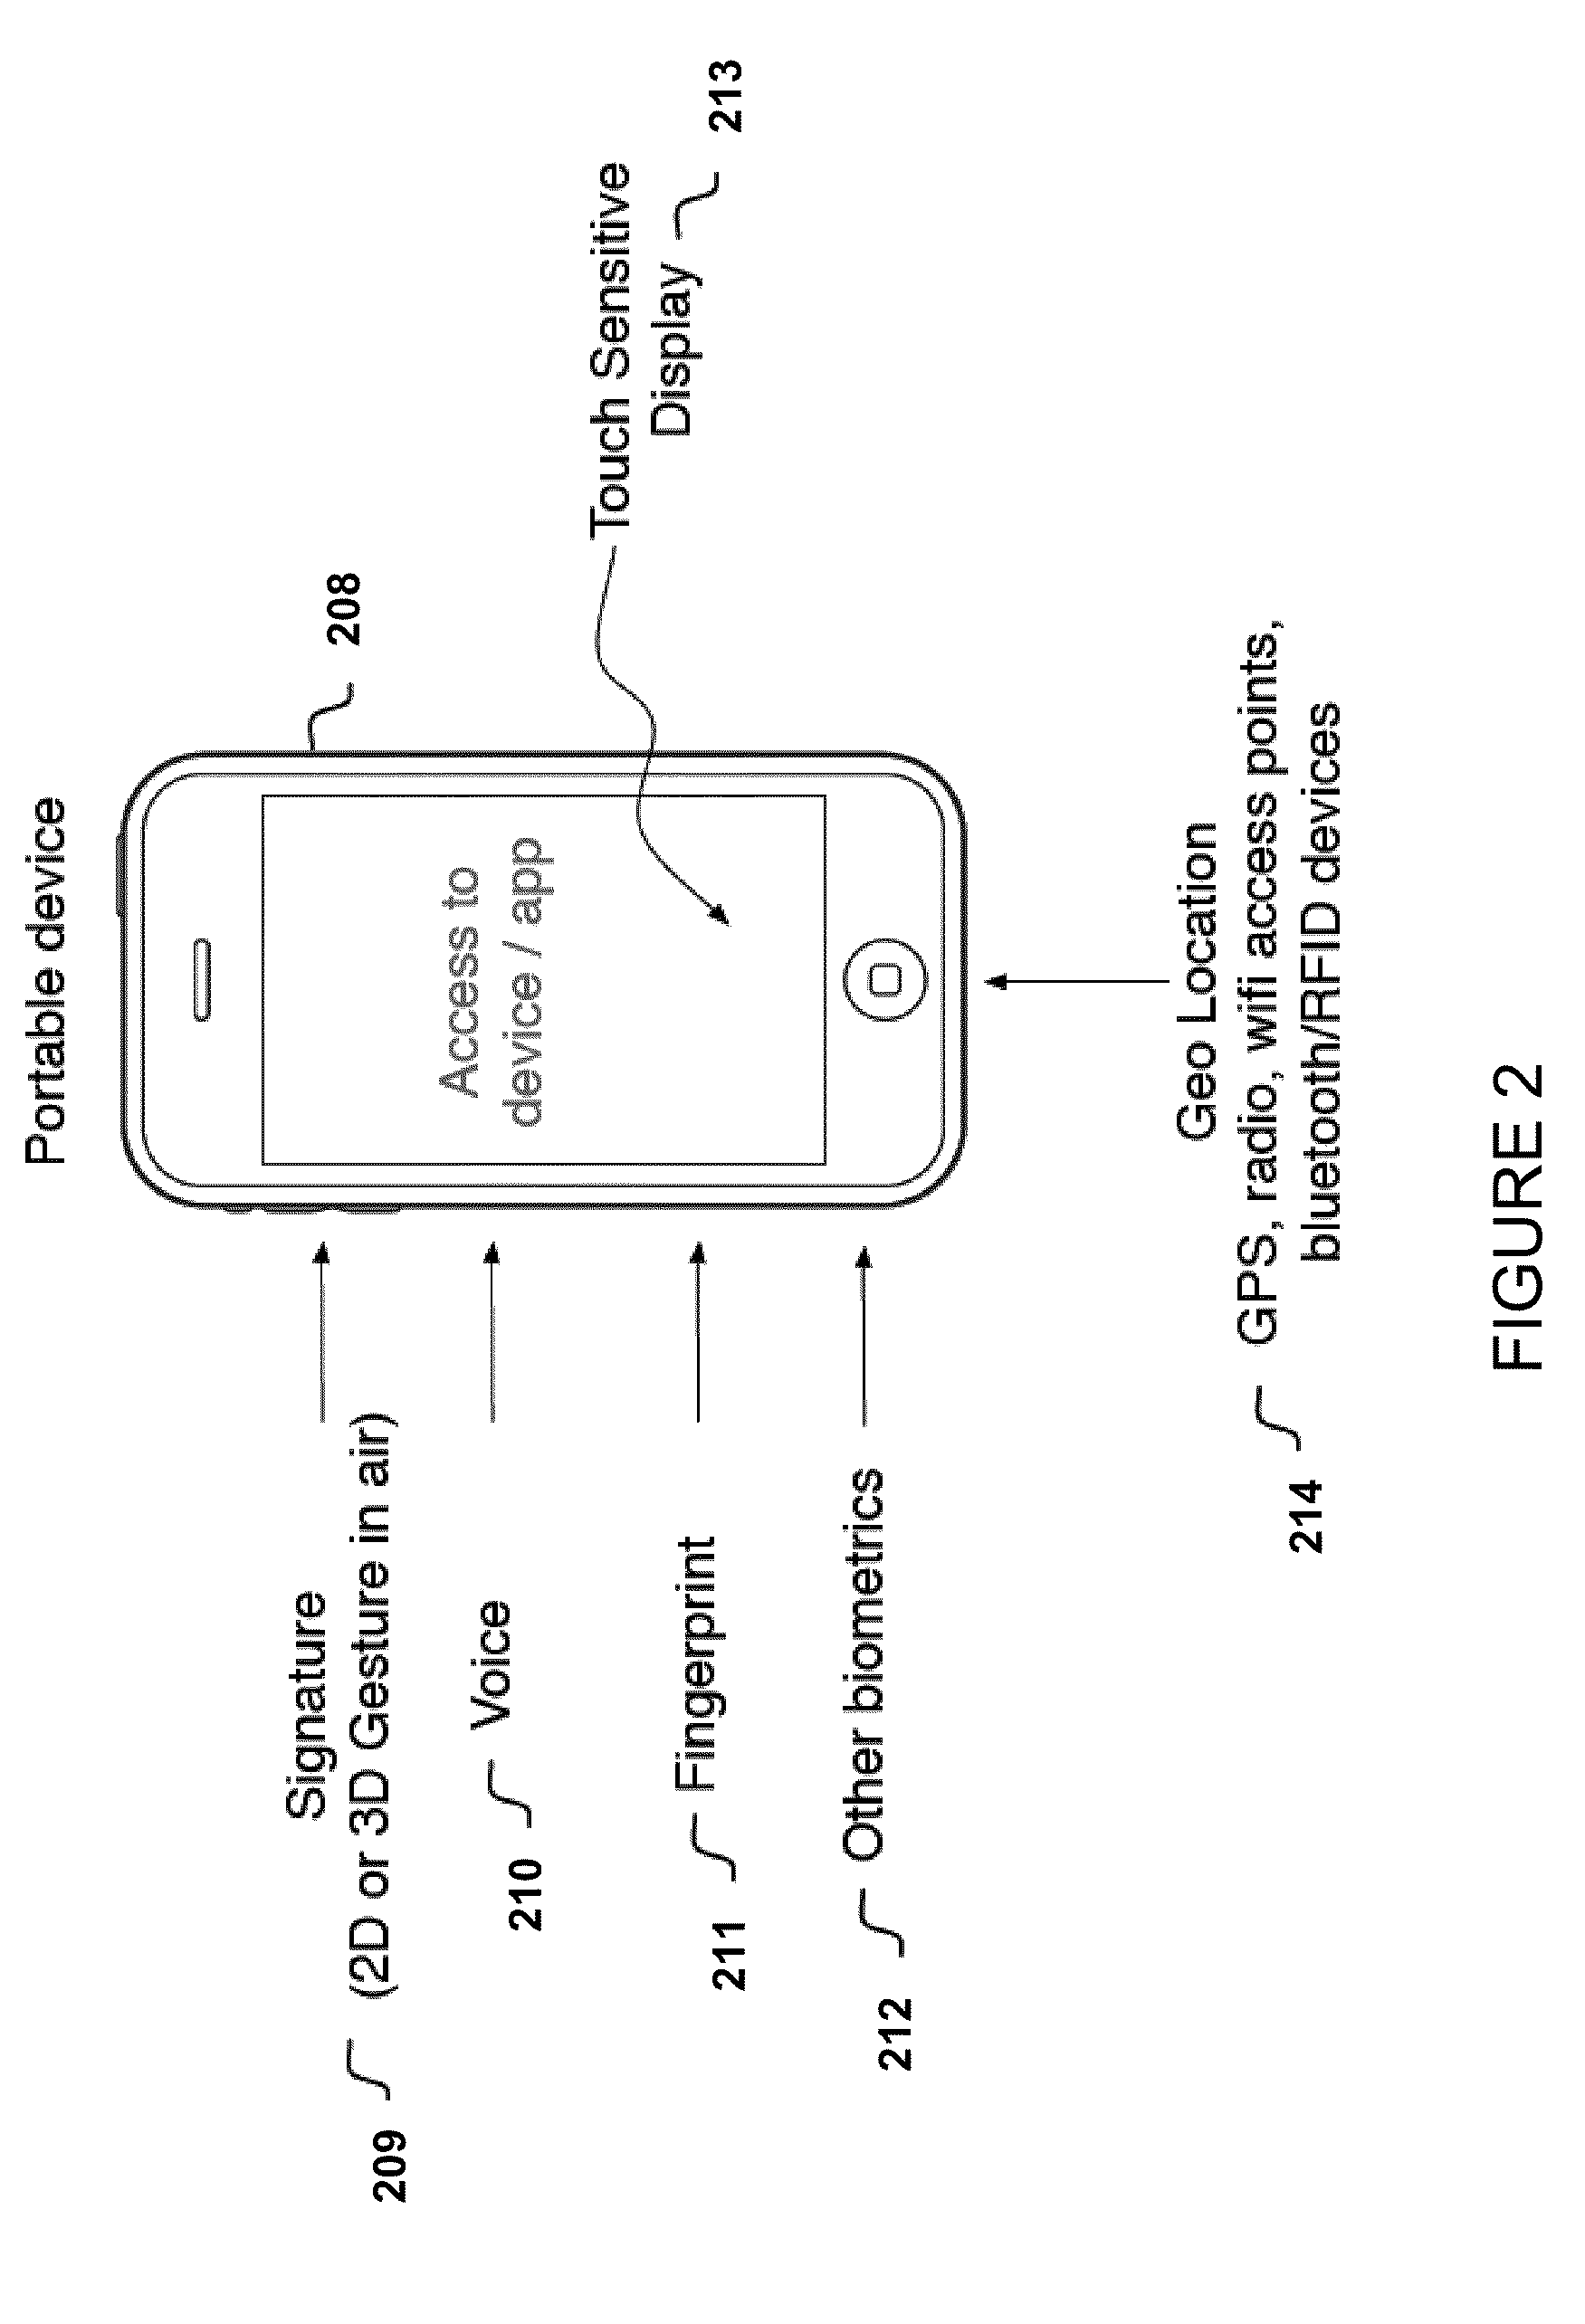 User authentication for devices with touch sensitive elements, such as touch sensitive display screens